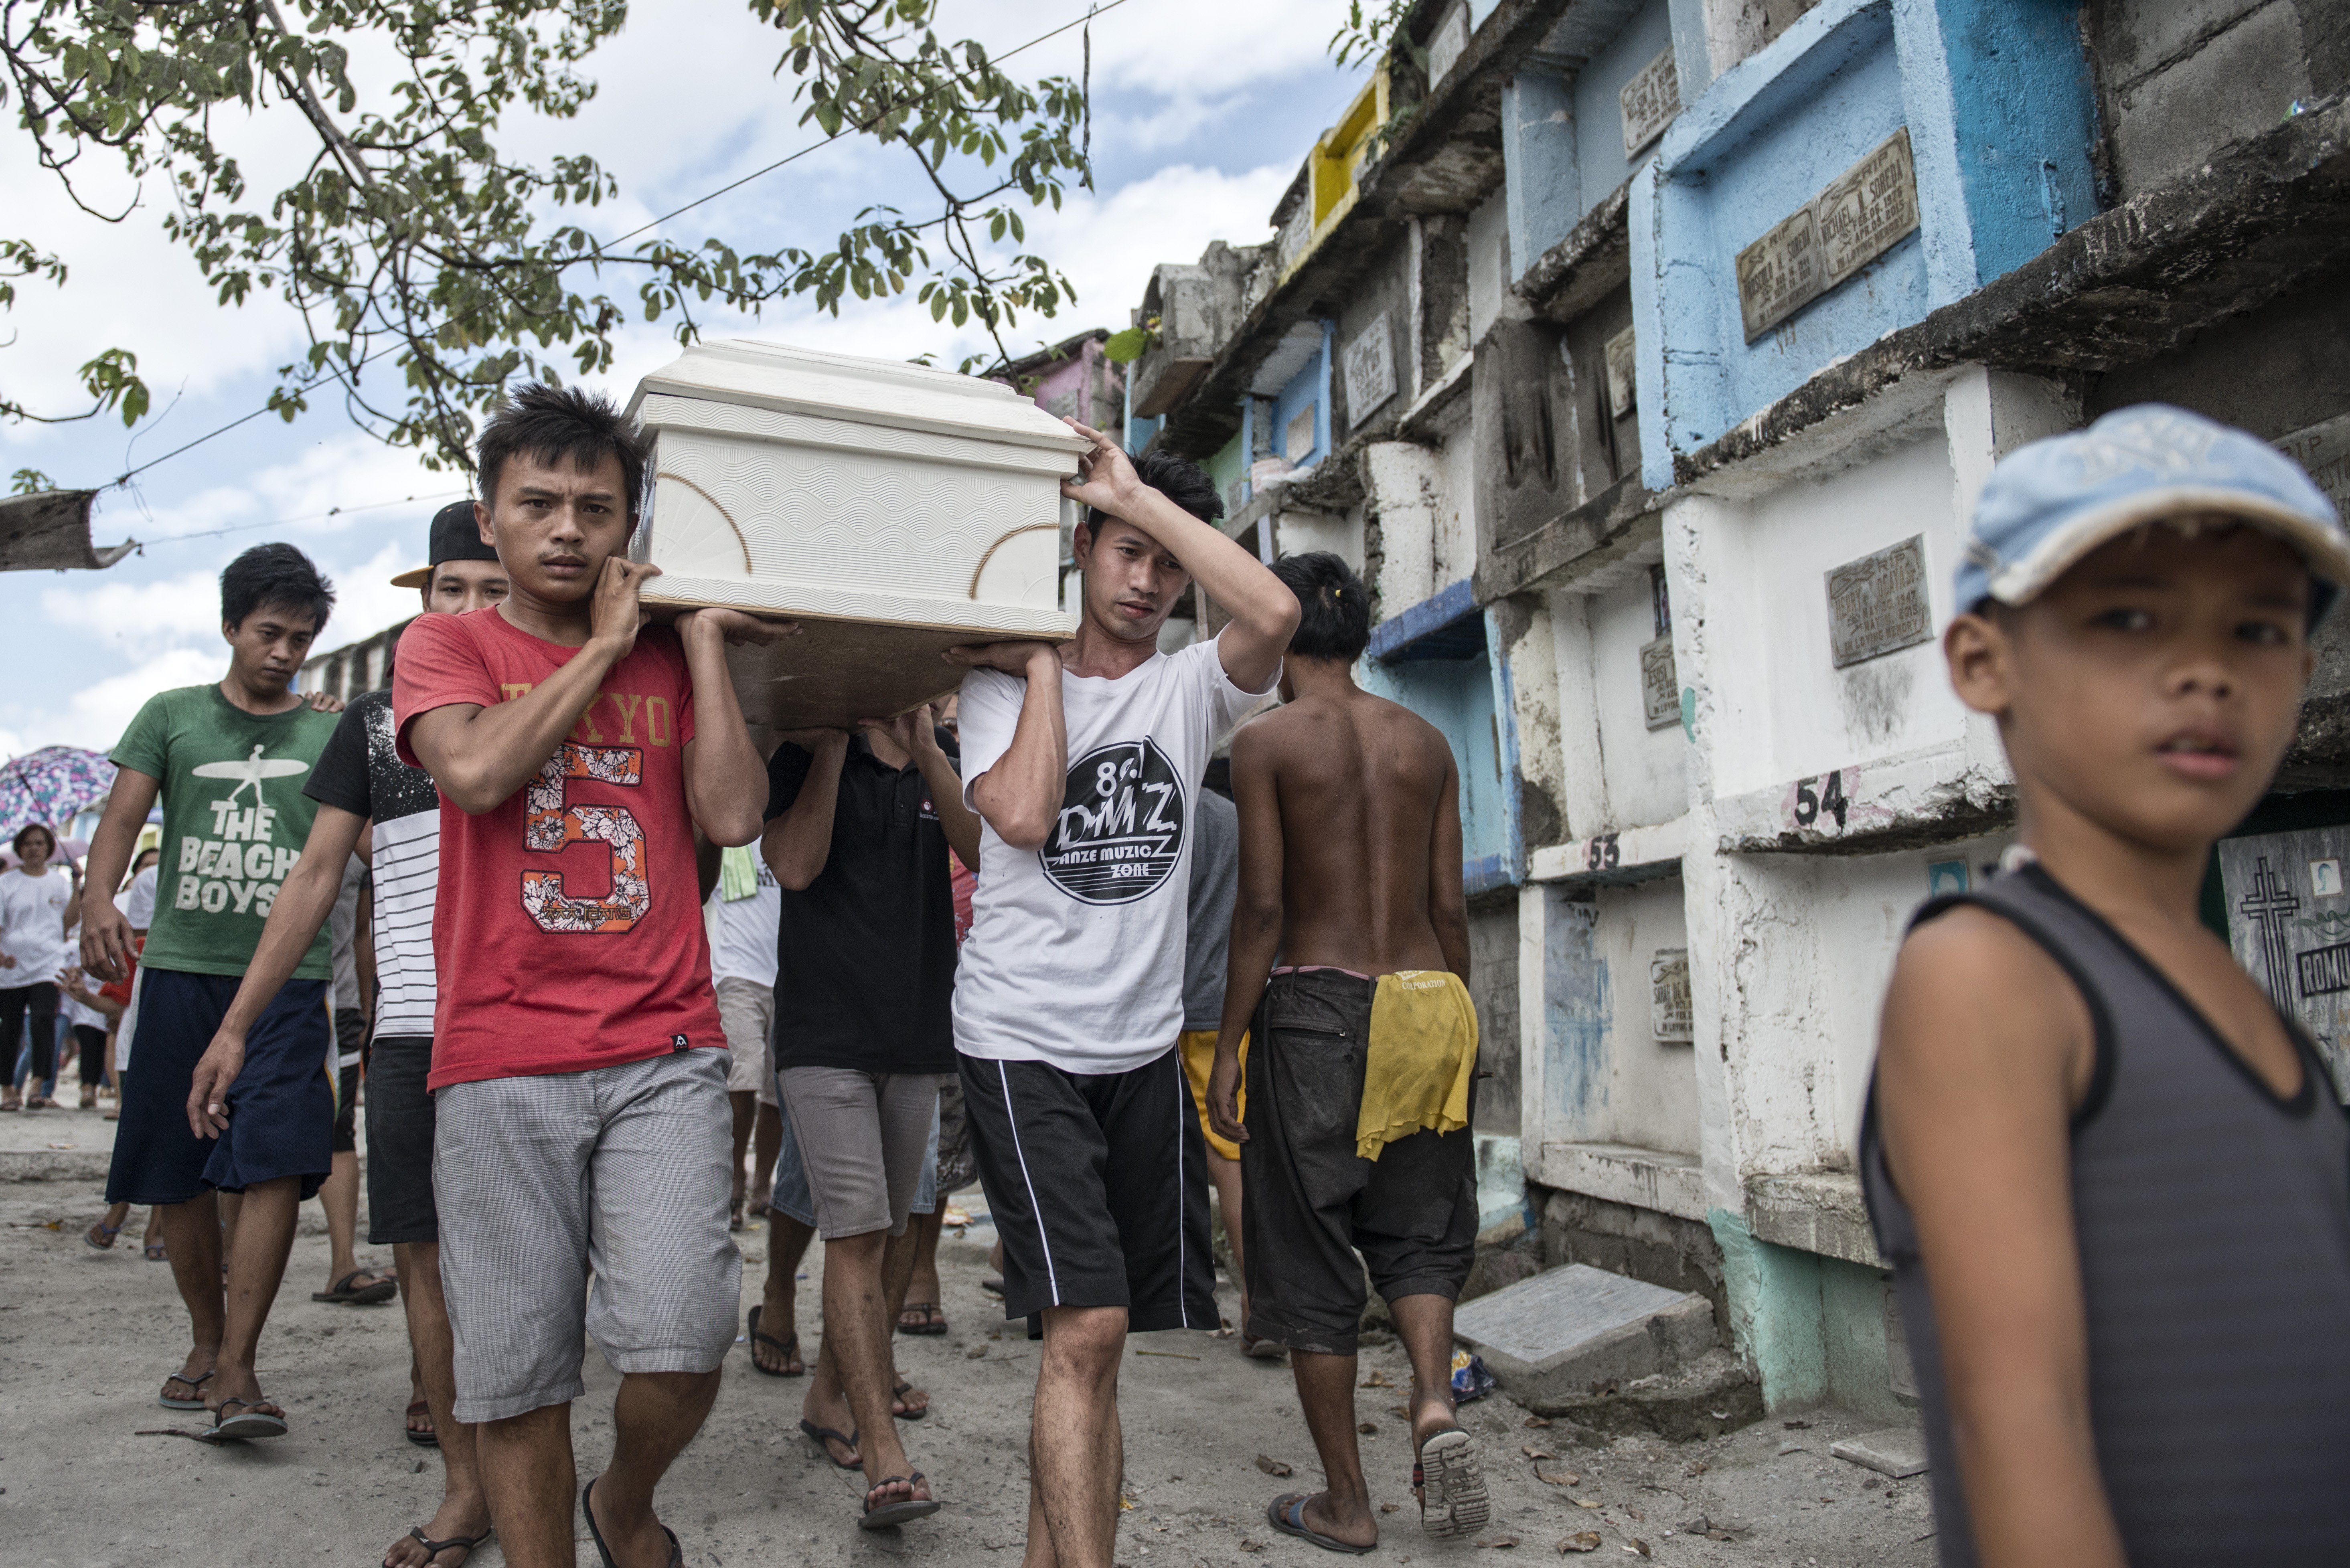 Despite international pressure to stop the extrajudicial killings and the police touting more transparency in their operations, the daily slaughter continues in Manila’s poverty stricken neighbourhoods